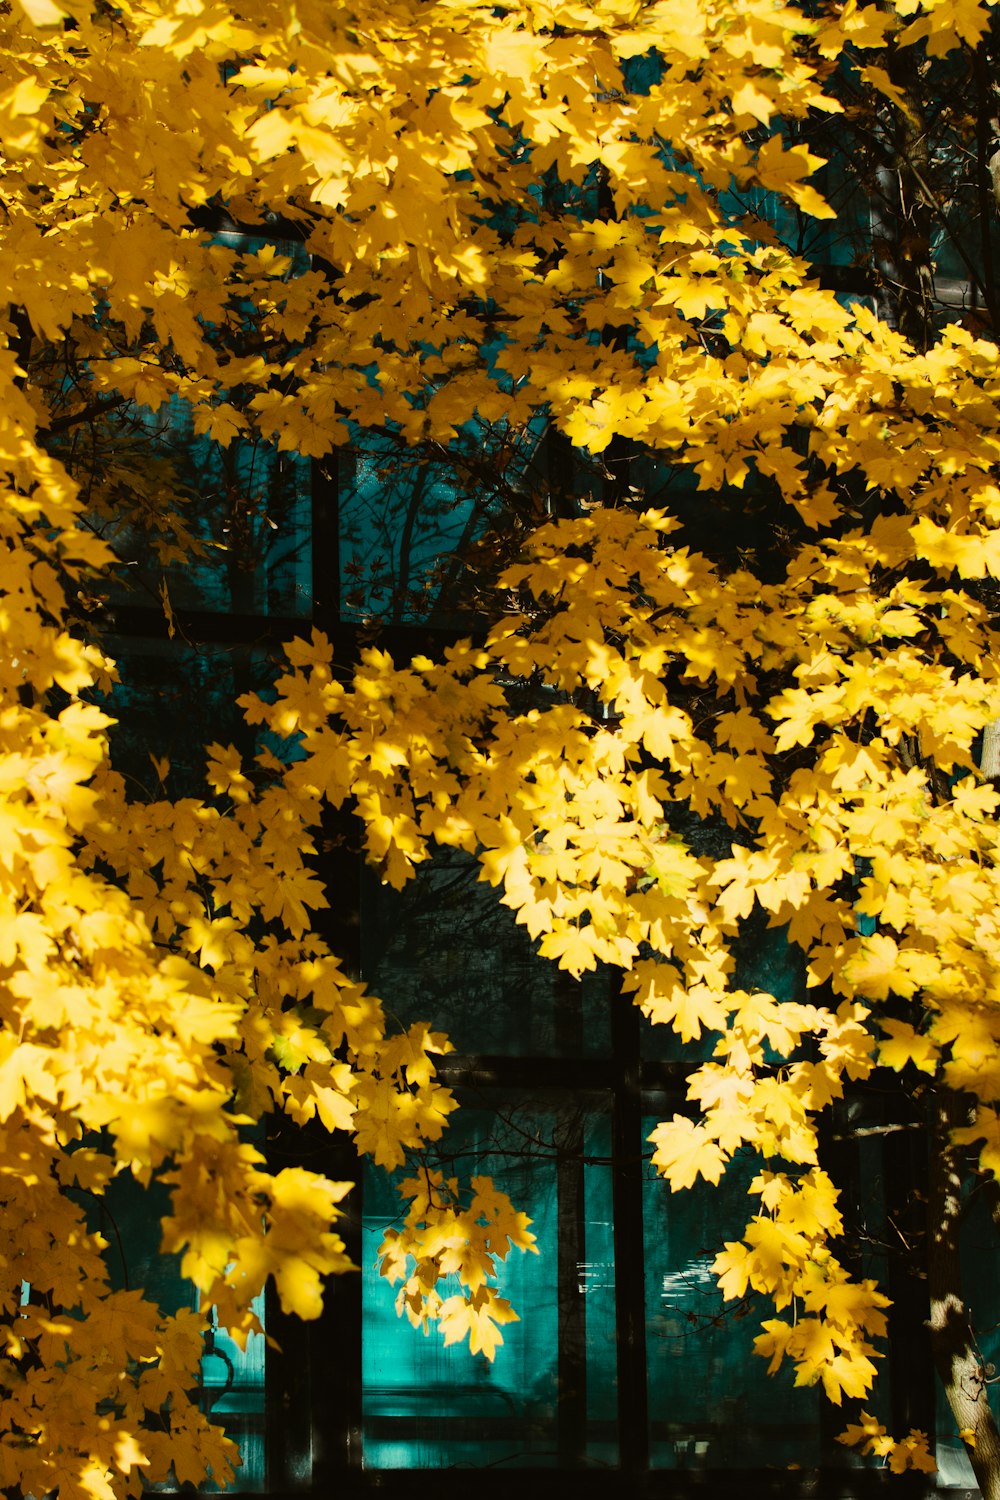 Yellow Nature Pictures | Download Free Images on Unsplash